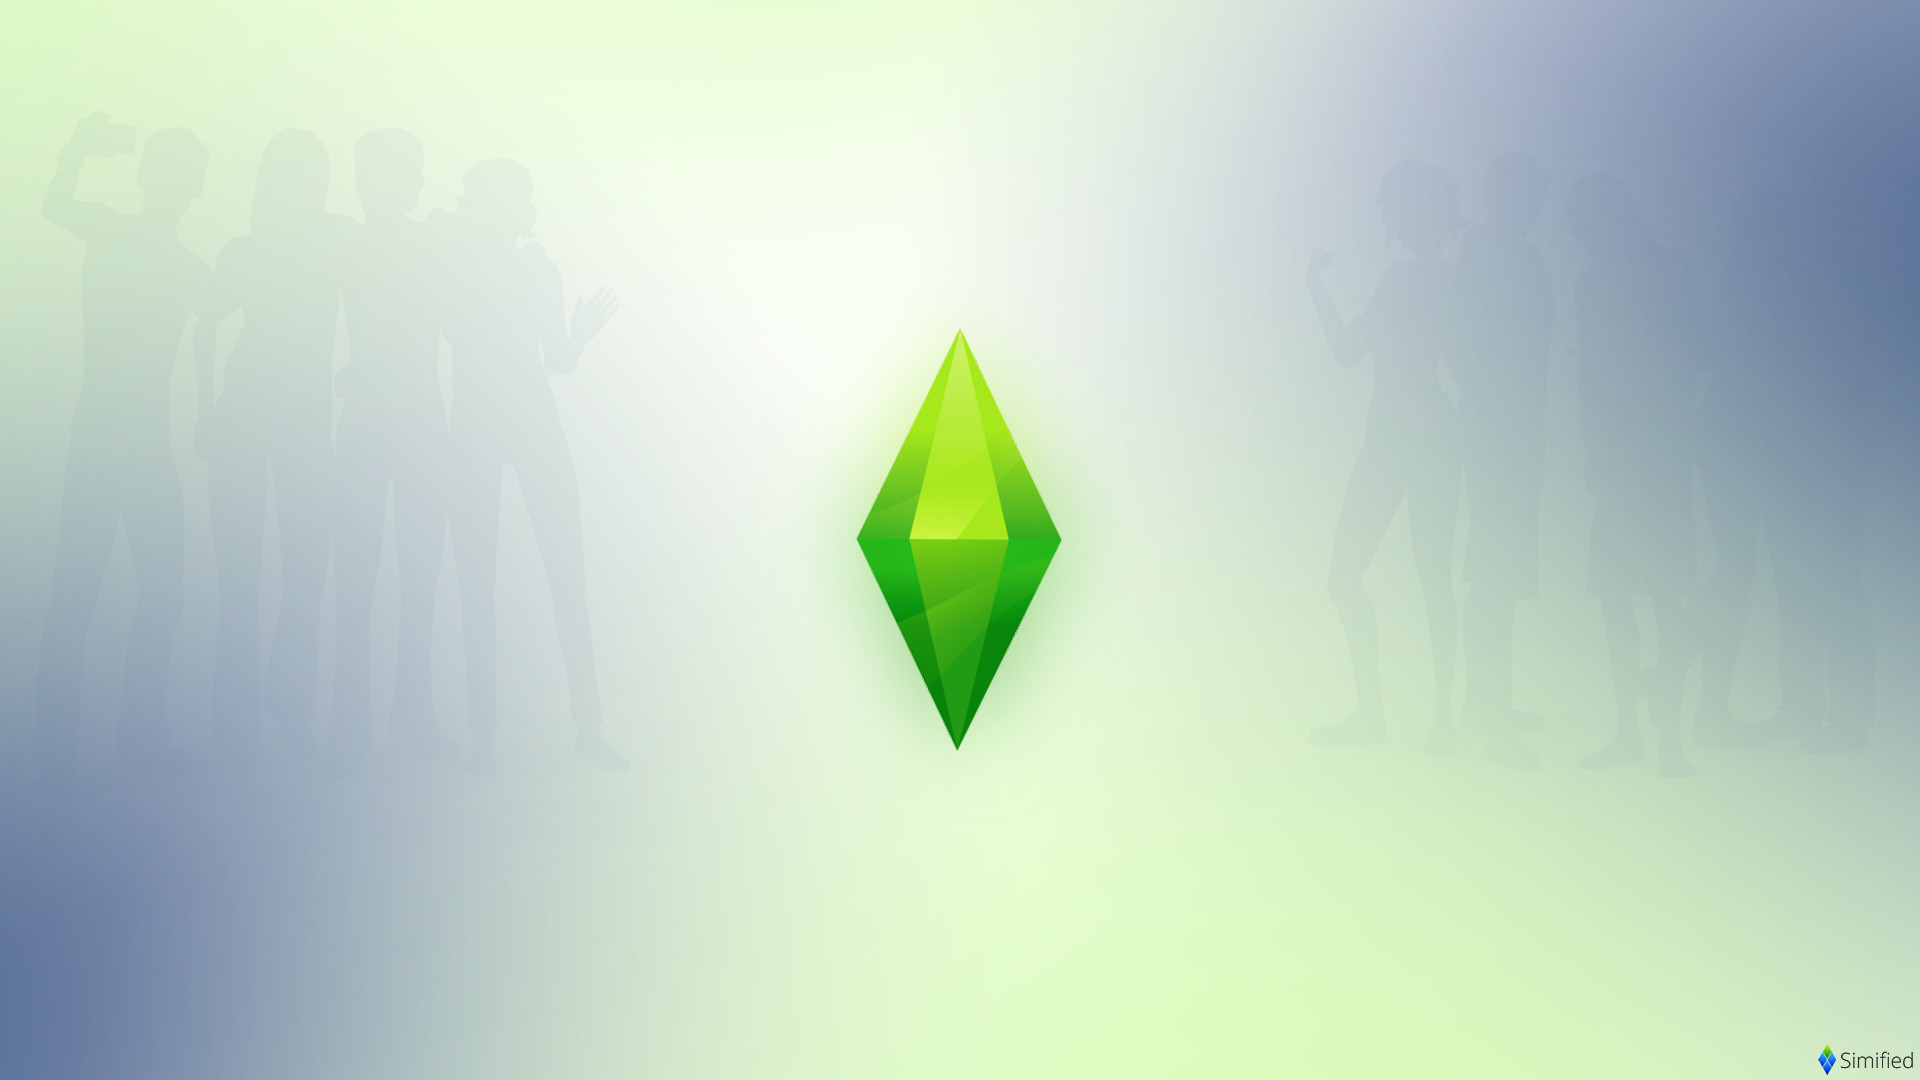 1920x1080 The Sims 4 Wallpaper High Res Image 728349 2954 Wallpaper Cool 